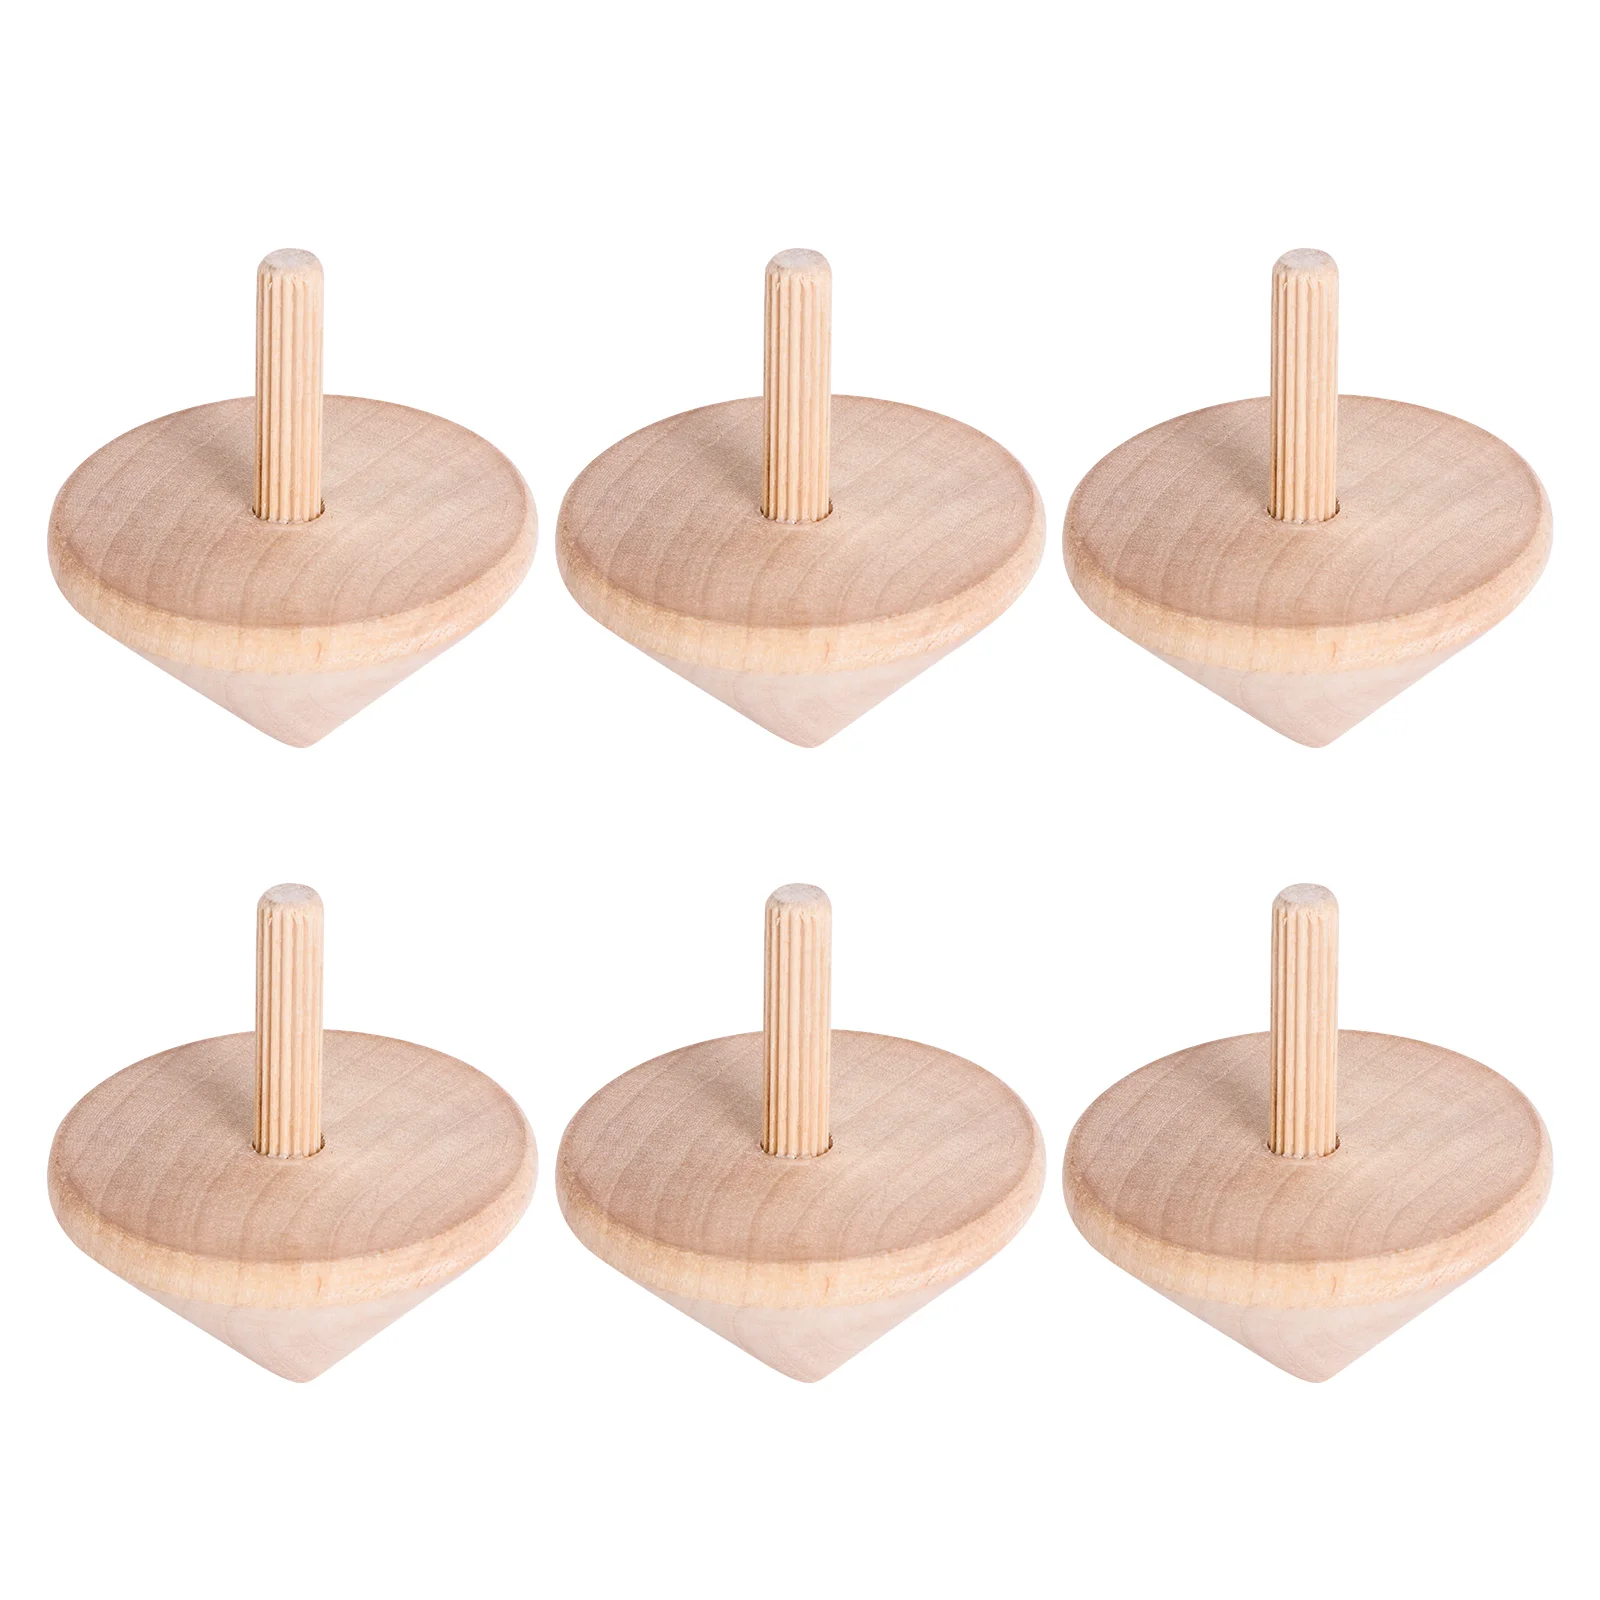 

6 Pcs Nostalgia Top Child Childrens Toys Educational for Toddlers Wooden Kids Tops